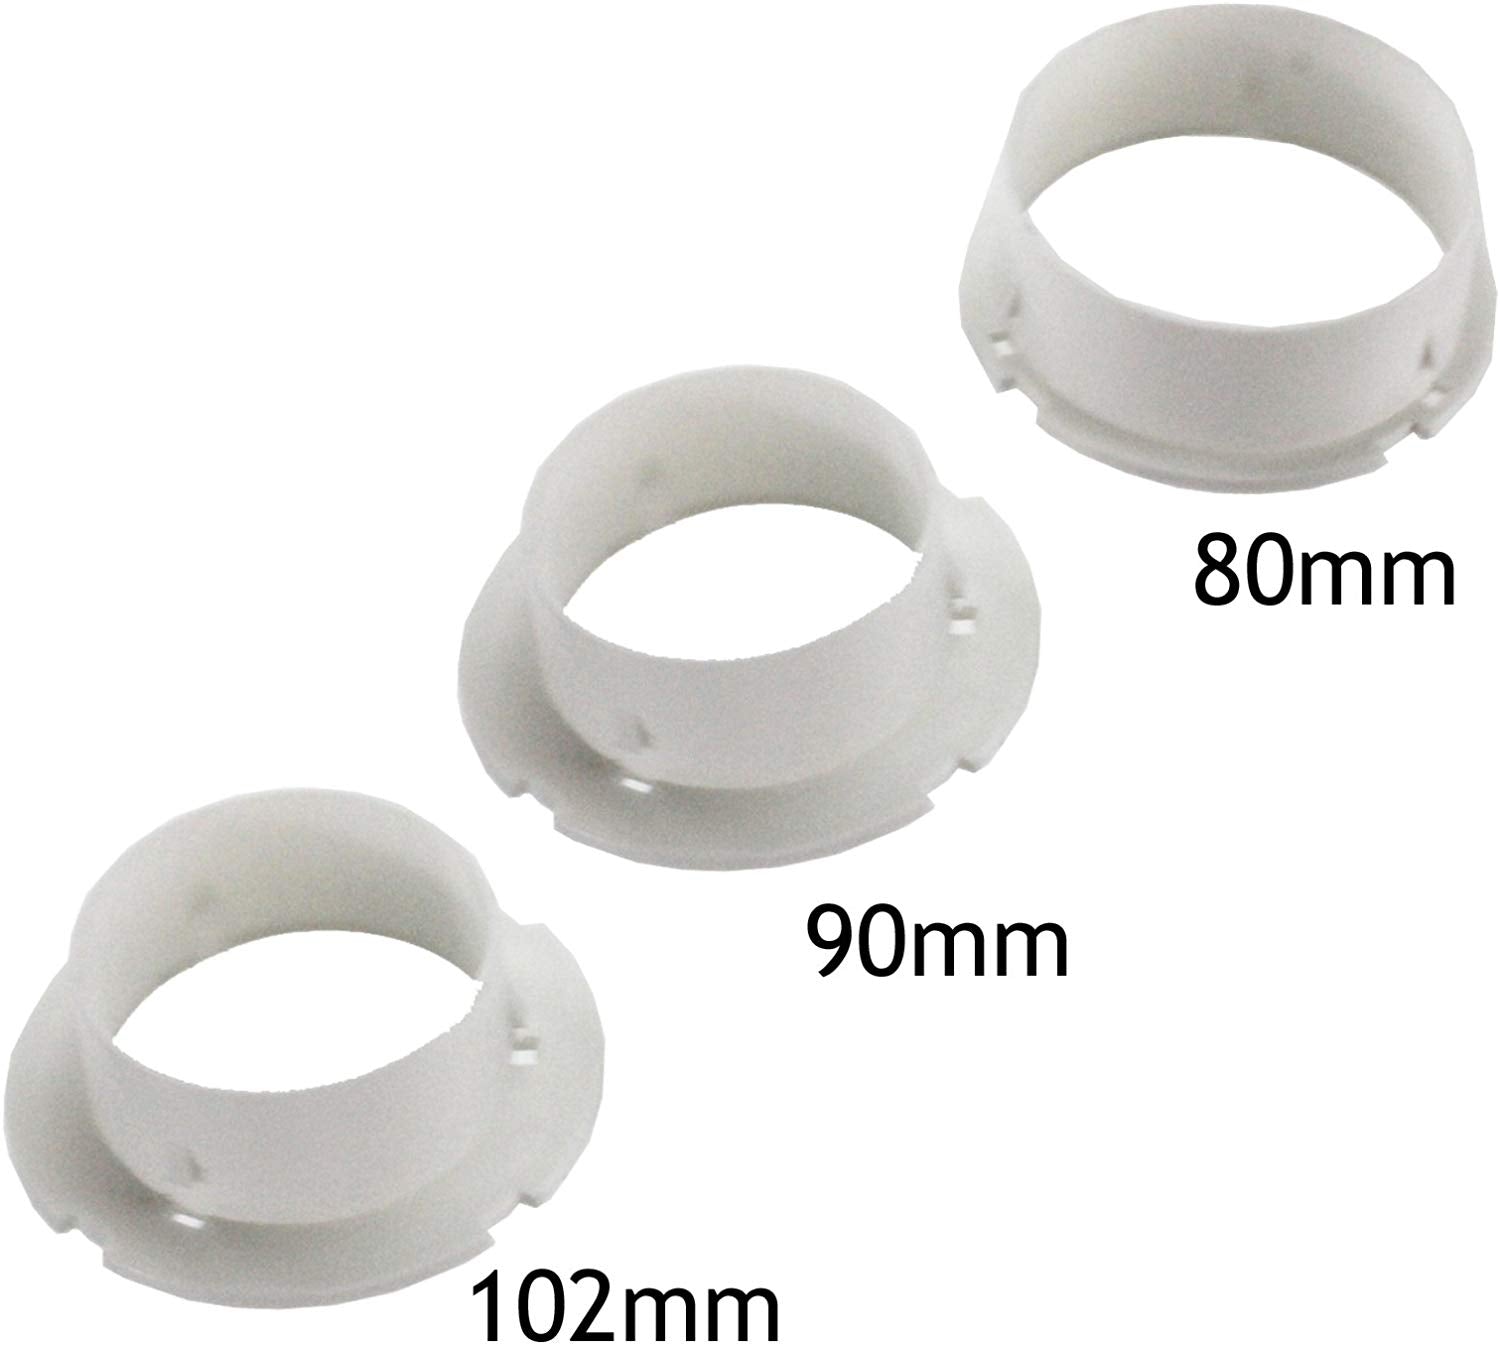 Vent Hose Condenser Kit with 3 x Adapters for Russell Hobbs Tumble Dryer (1.2m)